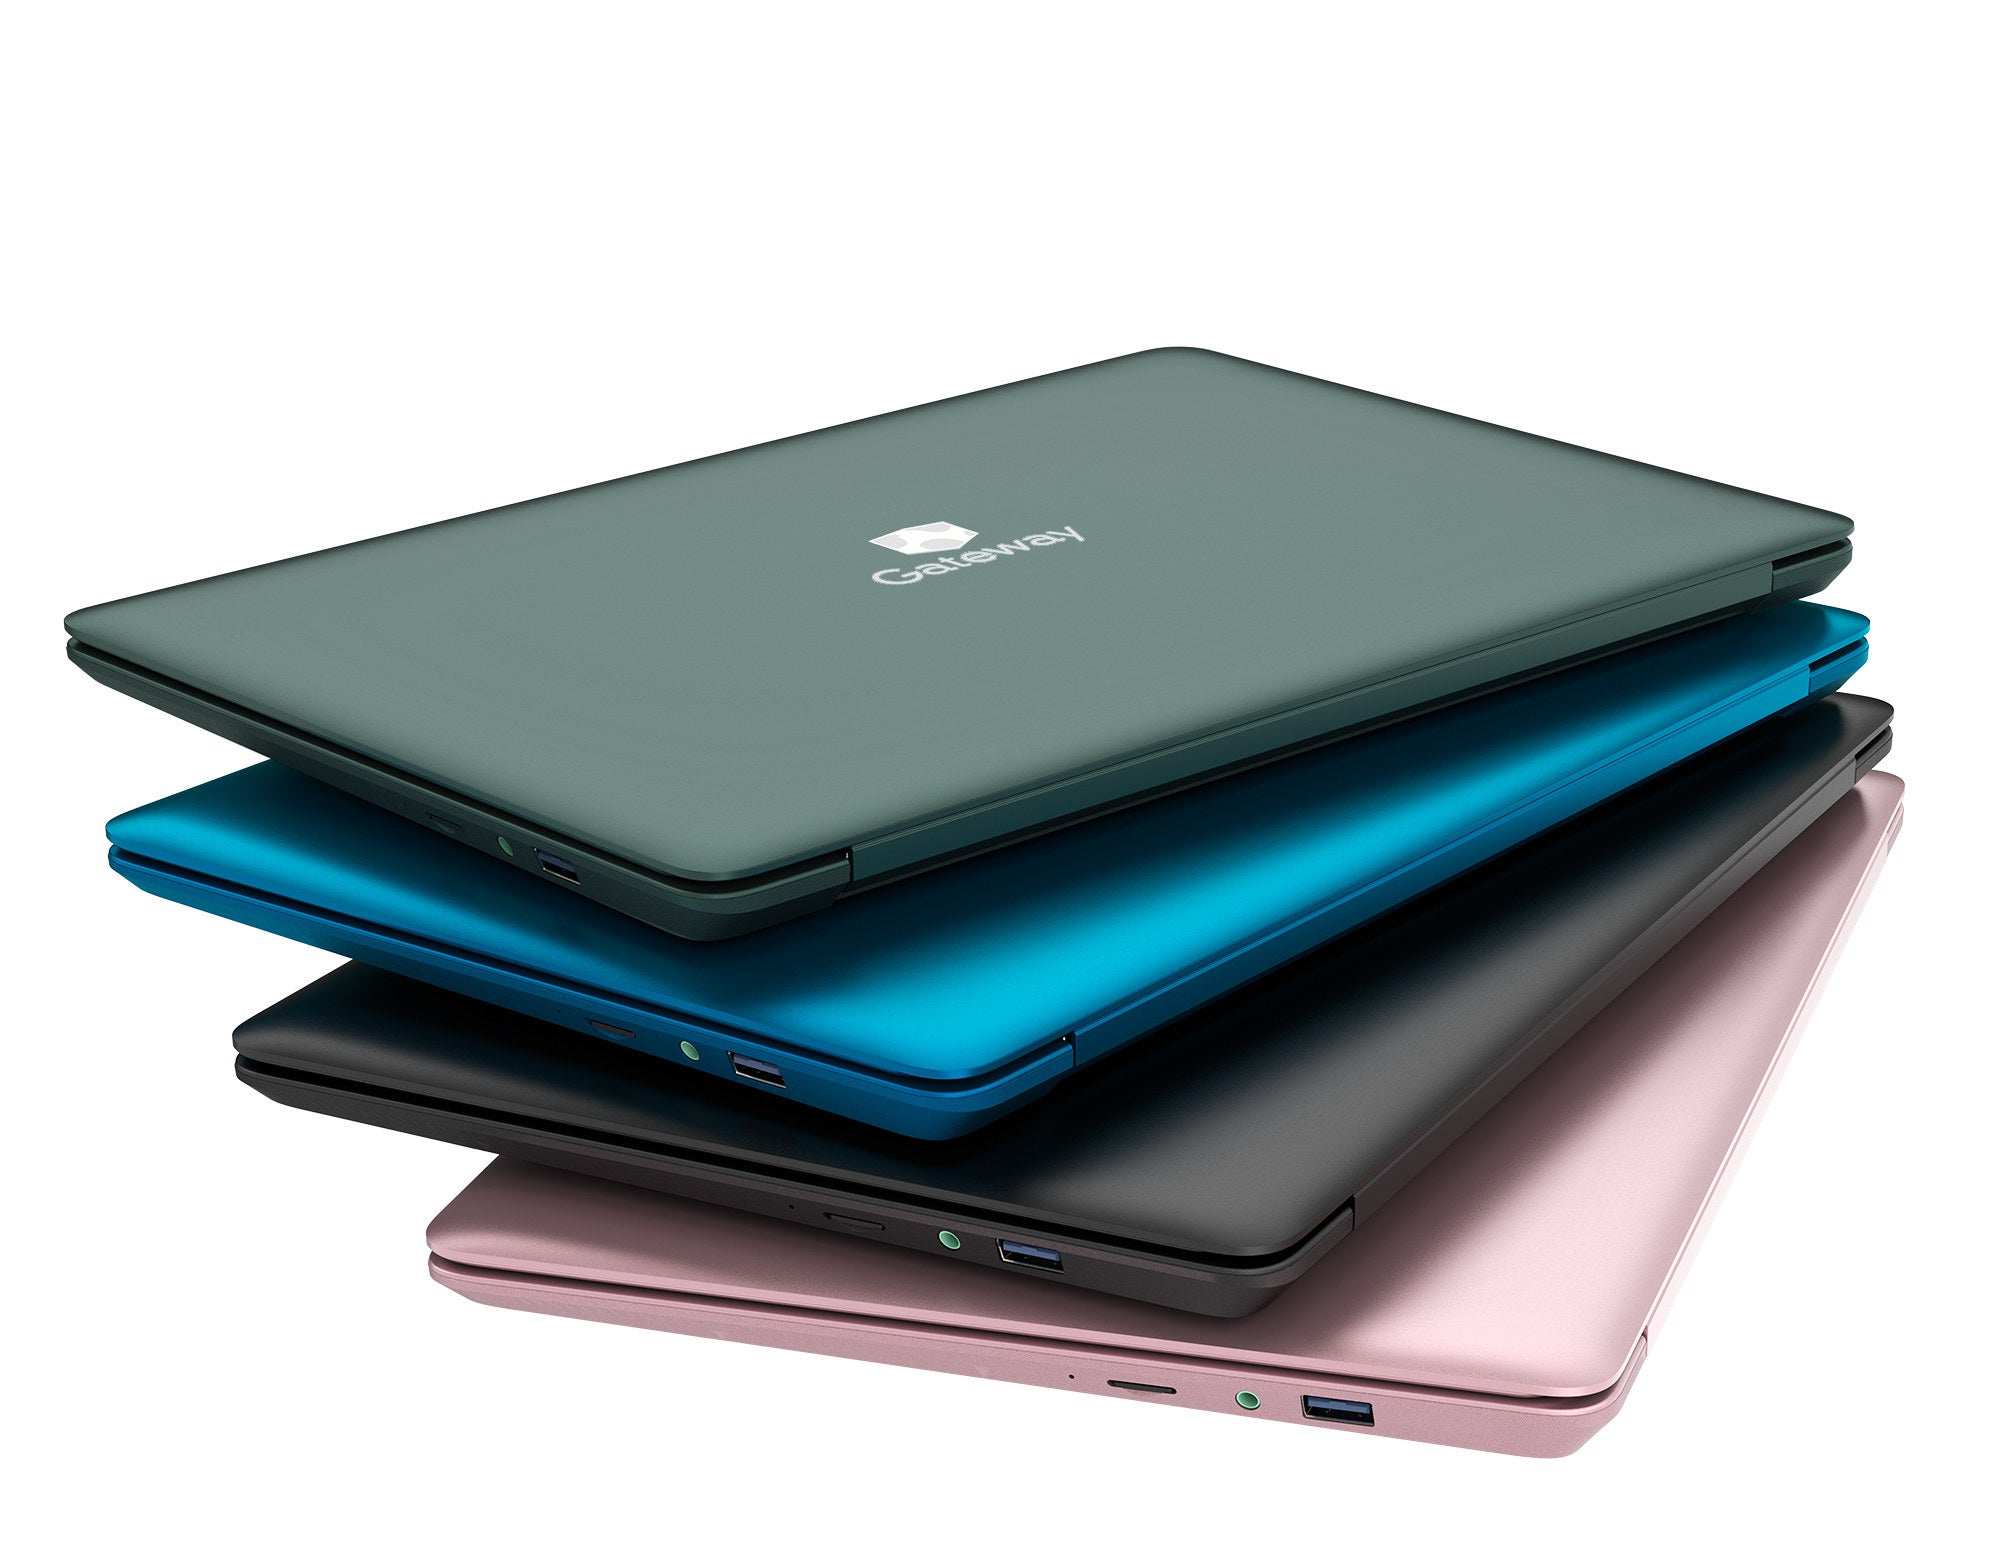 four gateway notebook laptops in green, blue, black, and pink